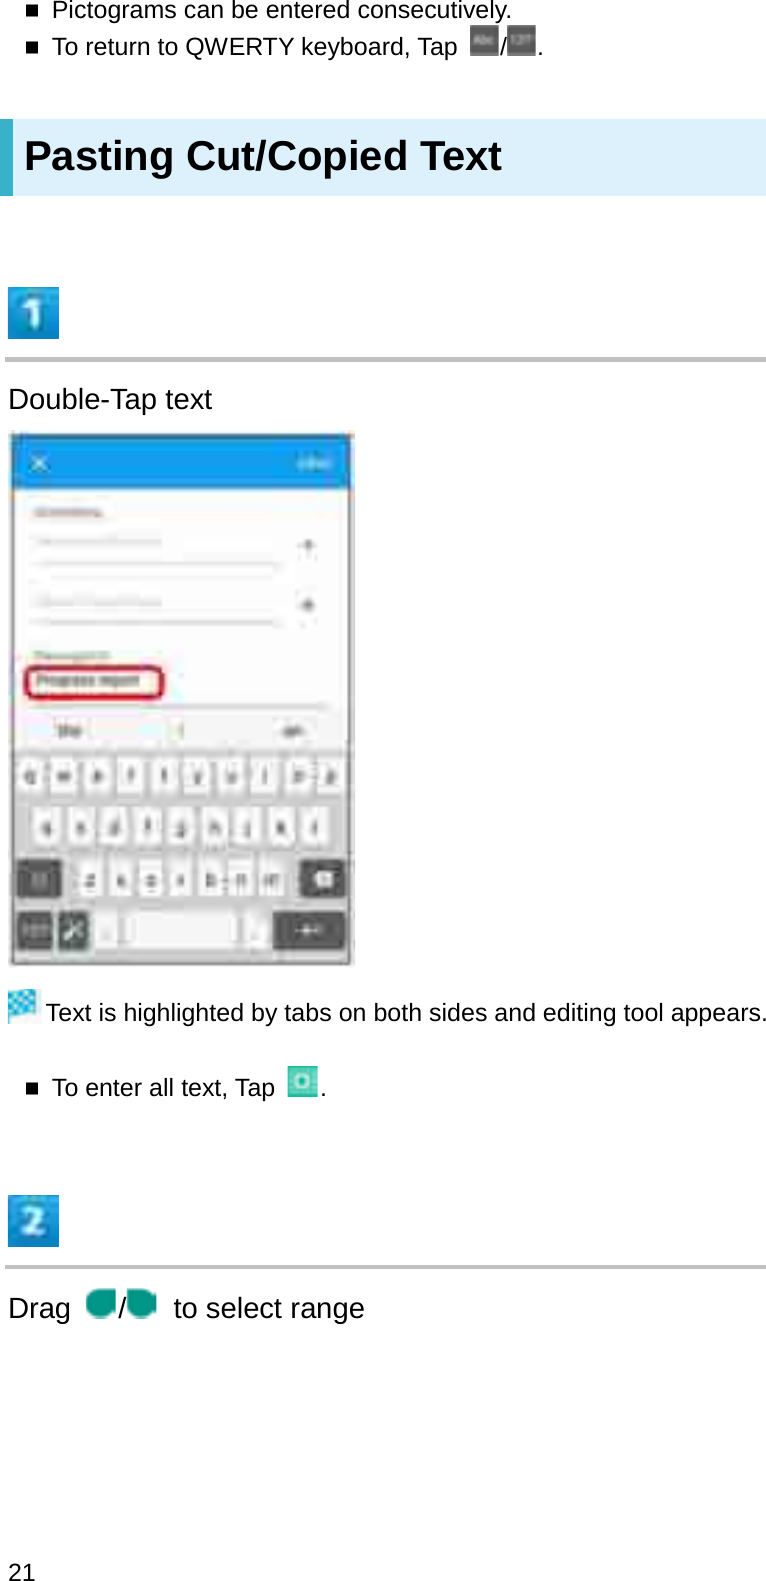 Pictograms can be entered consecutively.To return to QWERTY keyboard, Tap  / .Pasting Cut/Copied TextDouble-Tap textText is highlighted by tabs on both sides and editing tool appears.To enter all text, Tap  .Drag /to select range21